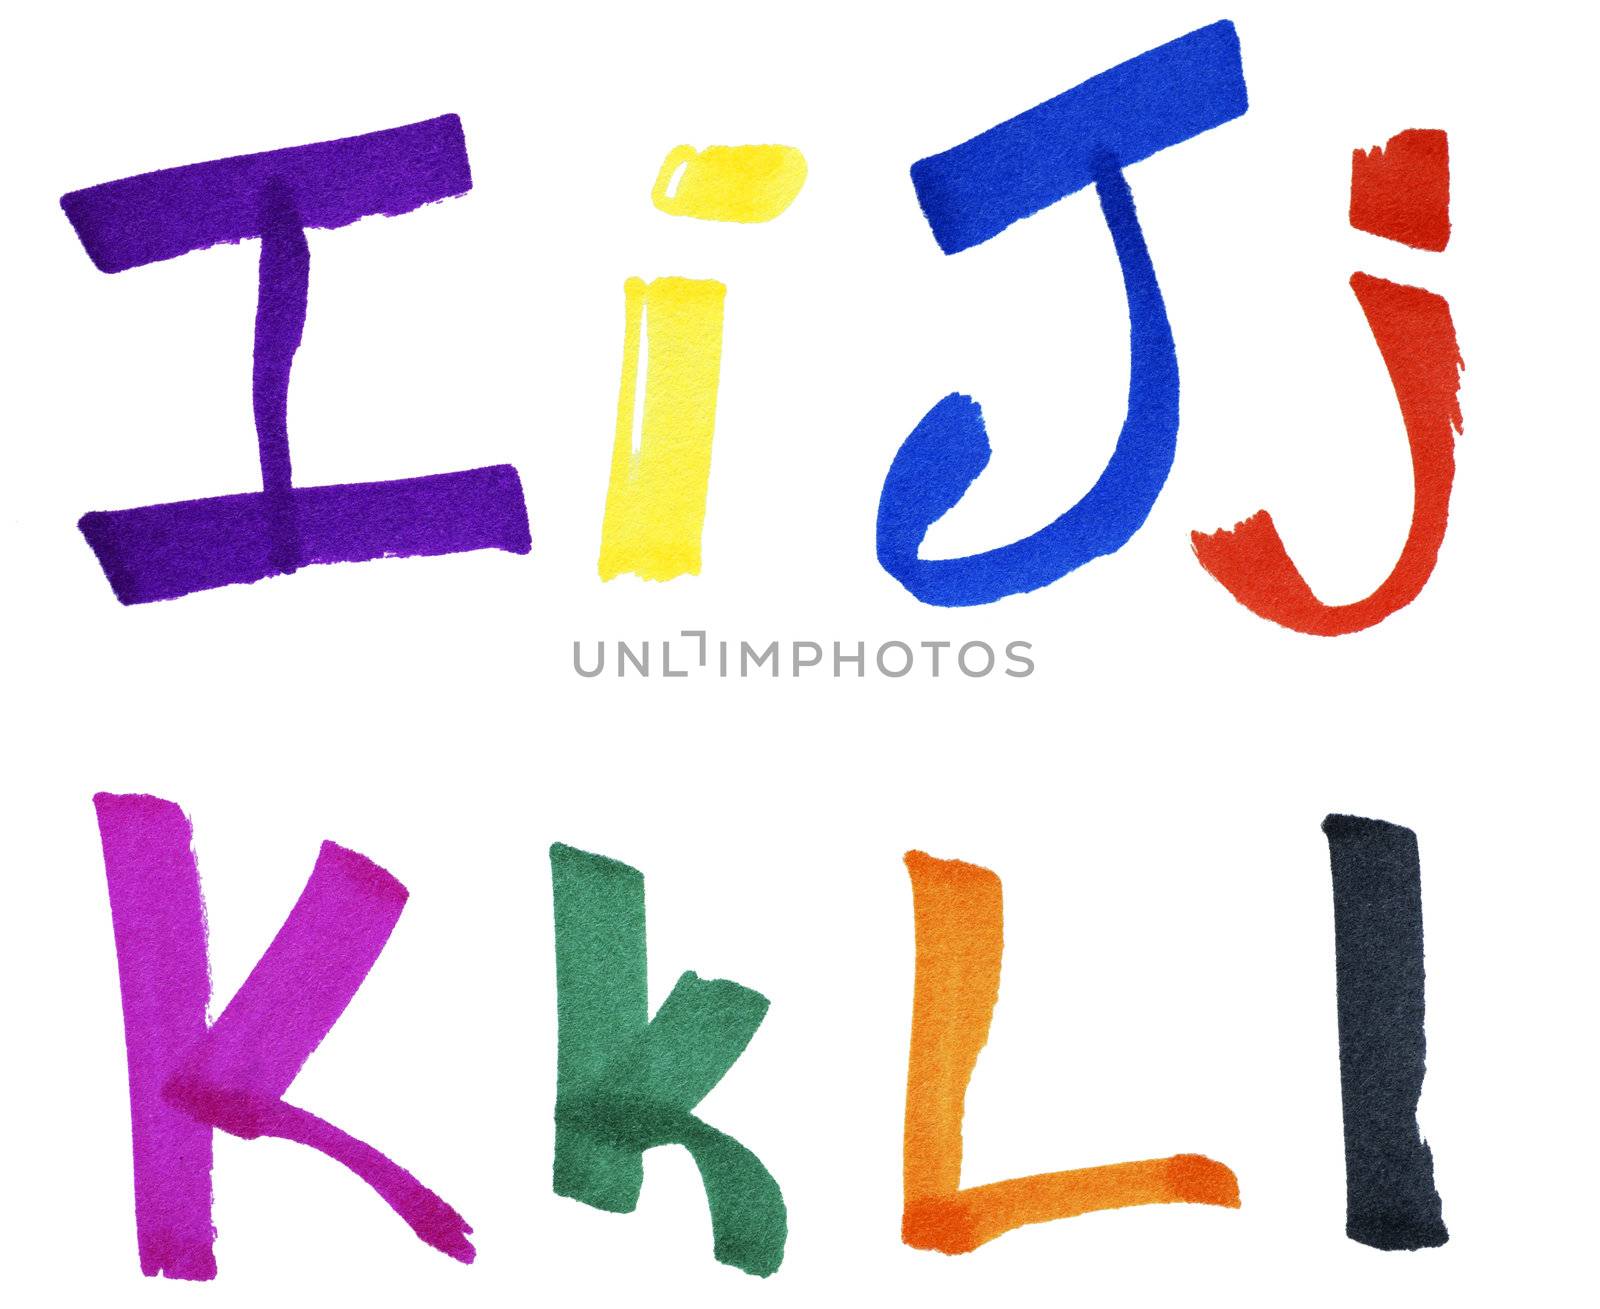 Very large handwritten font, letters I J K L in capital and small cases, made with colorful ink markers and paper fibers visible.